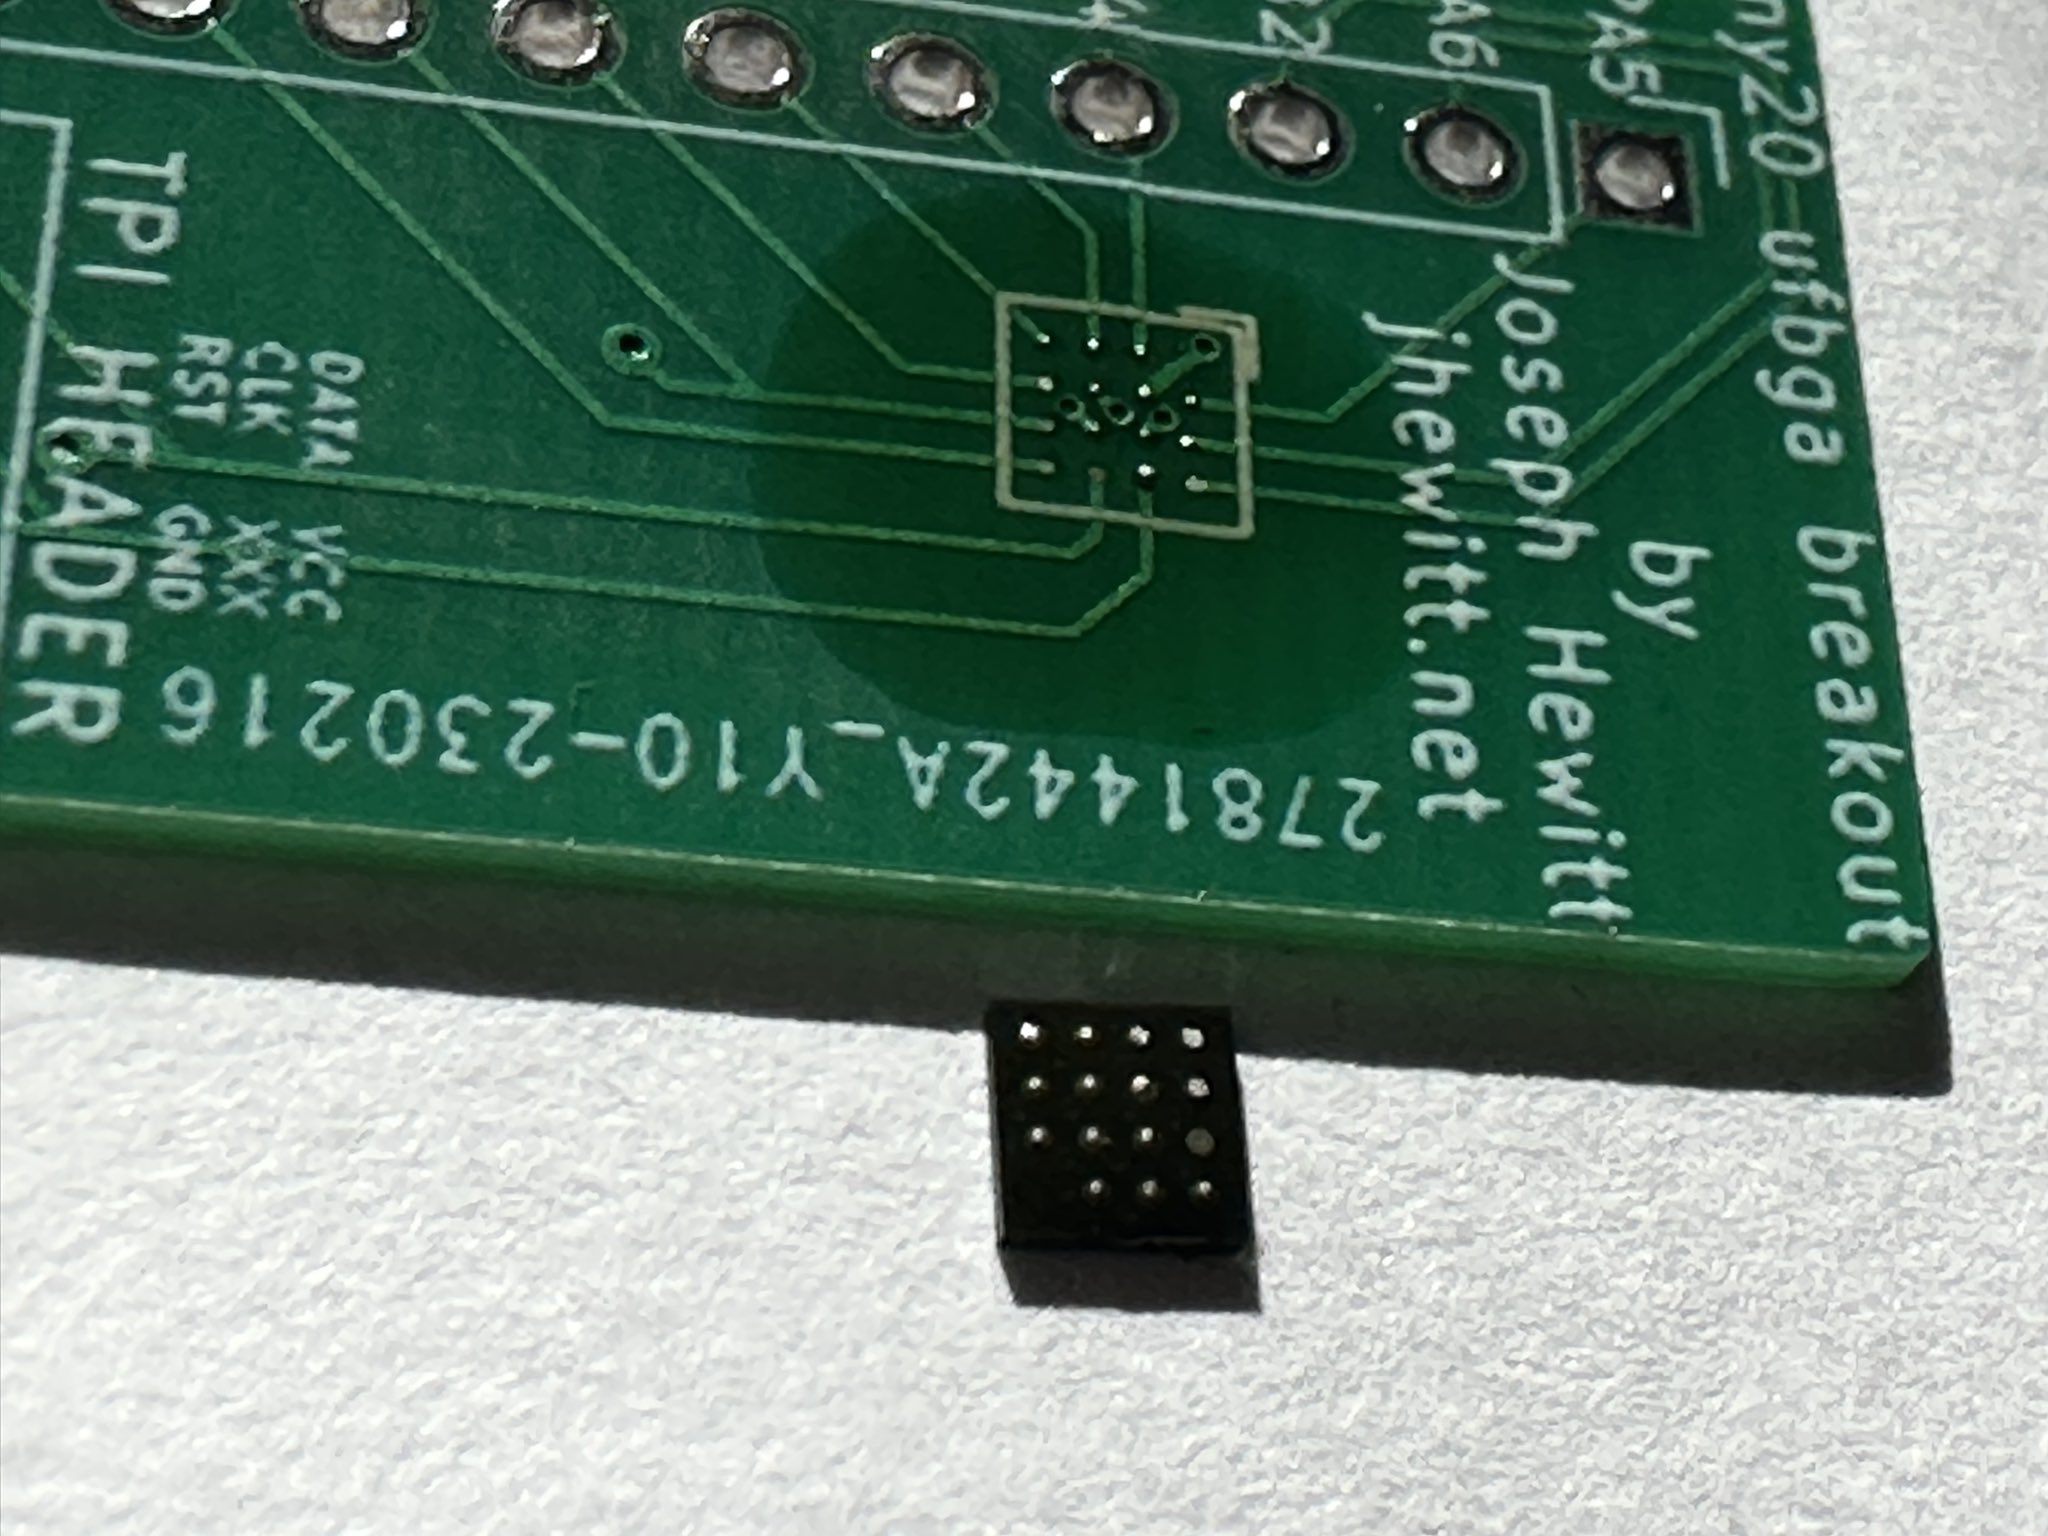 attiny20 removed from PCB